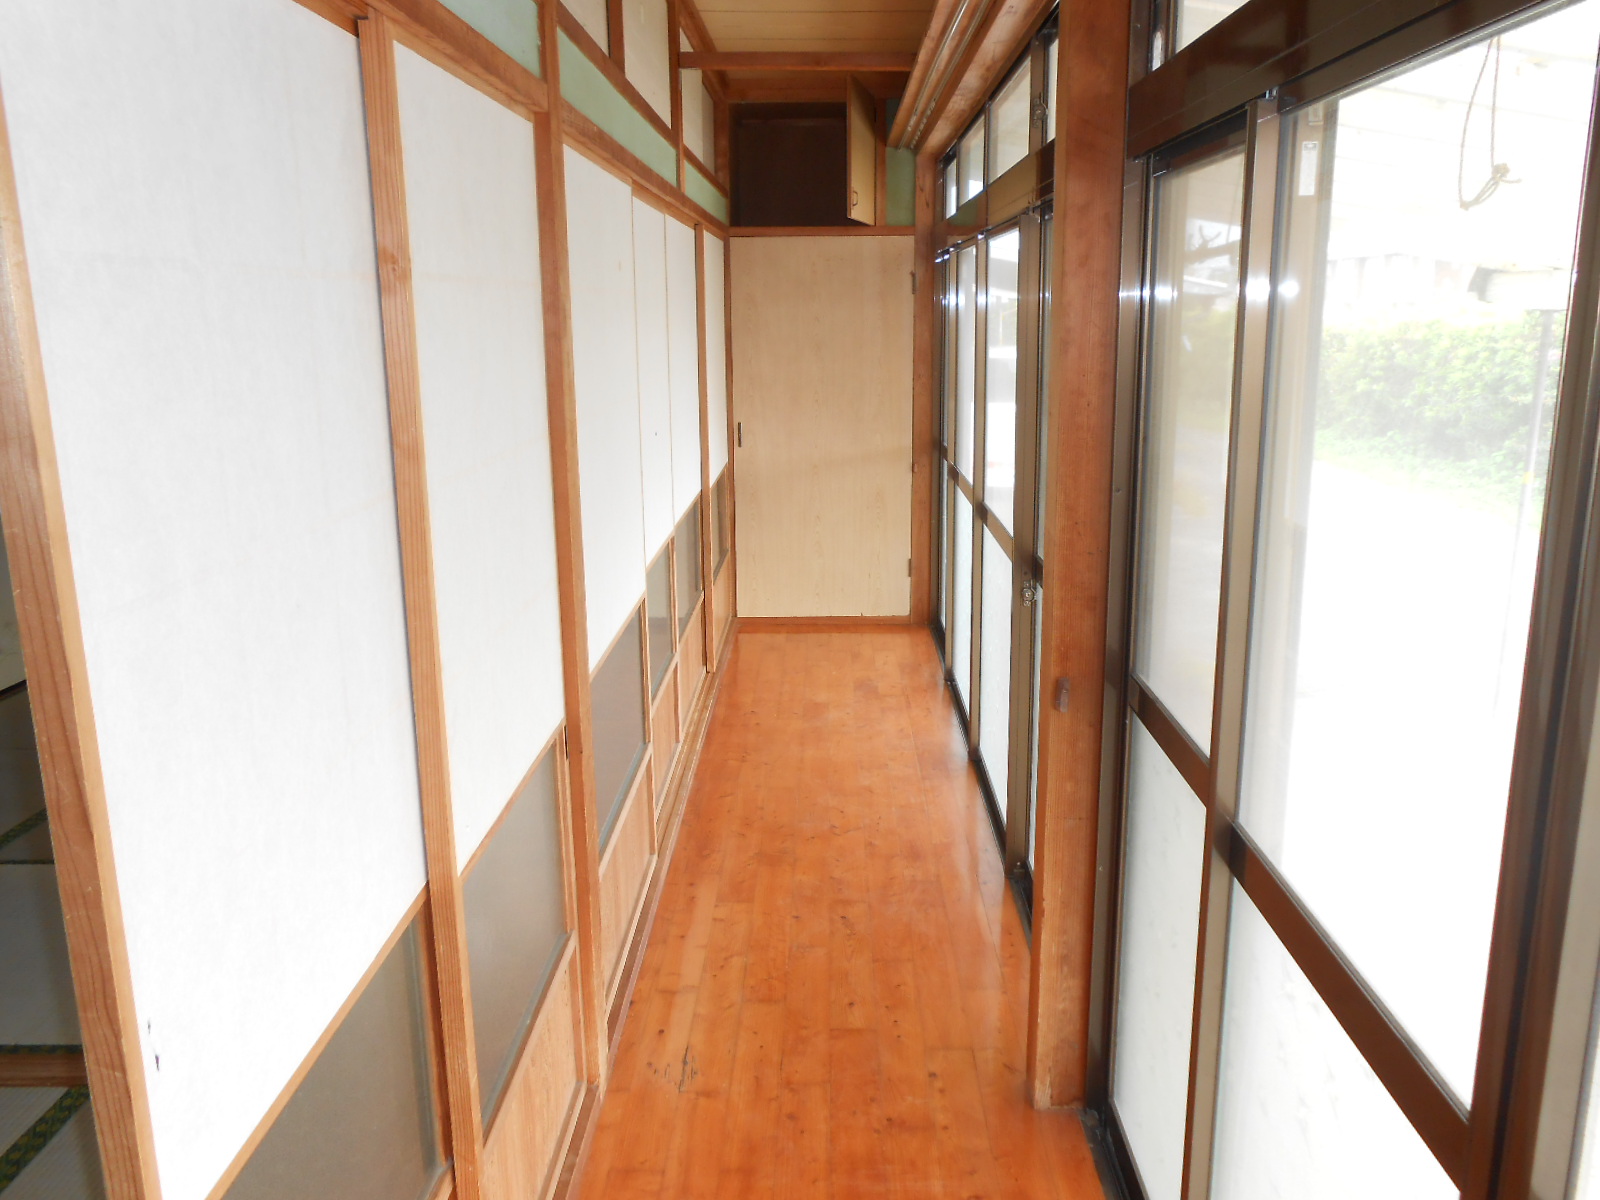 Other room space. There is also a storage veranda